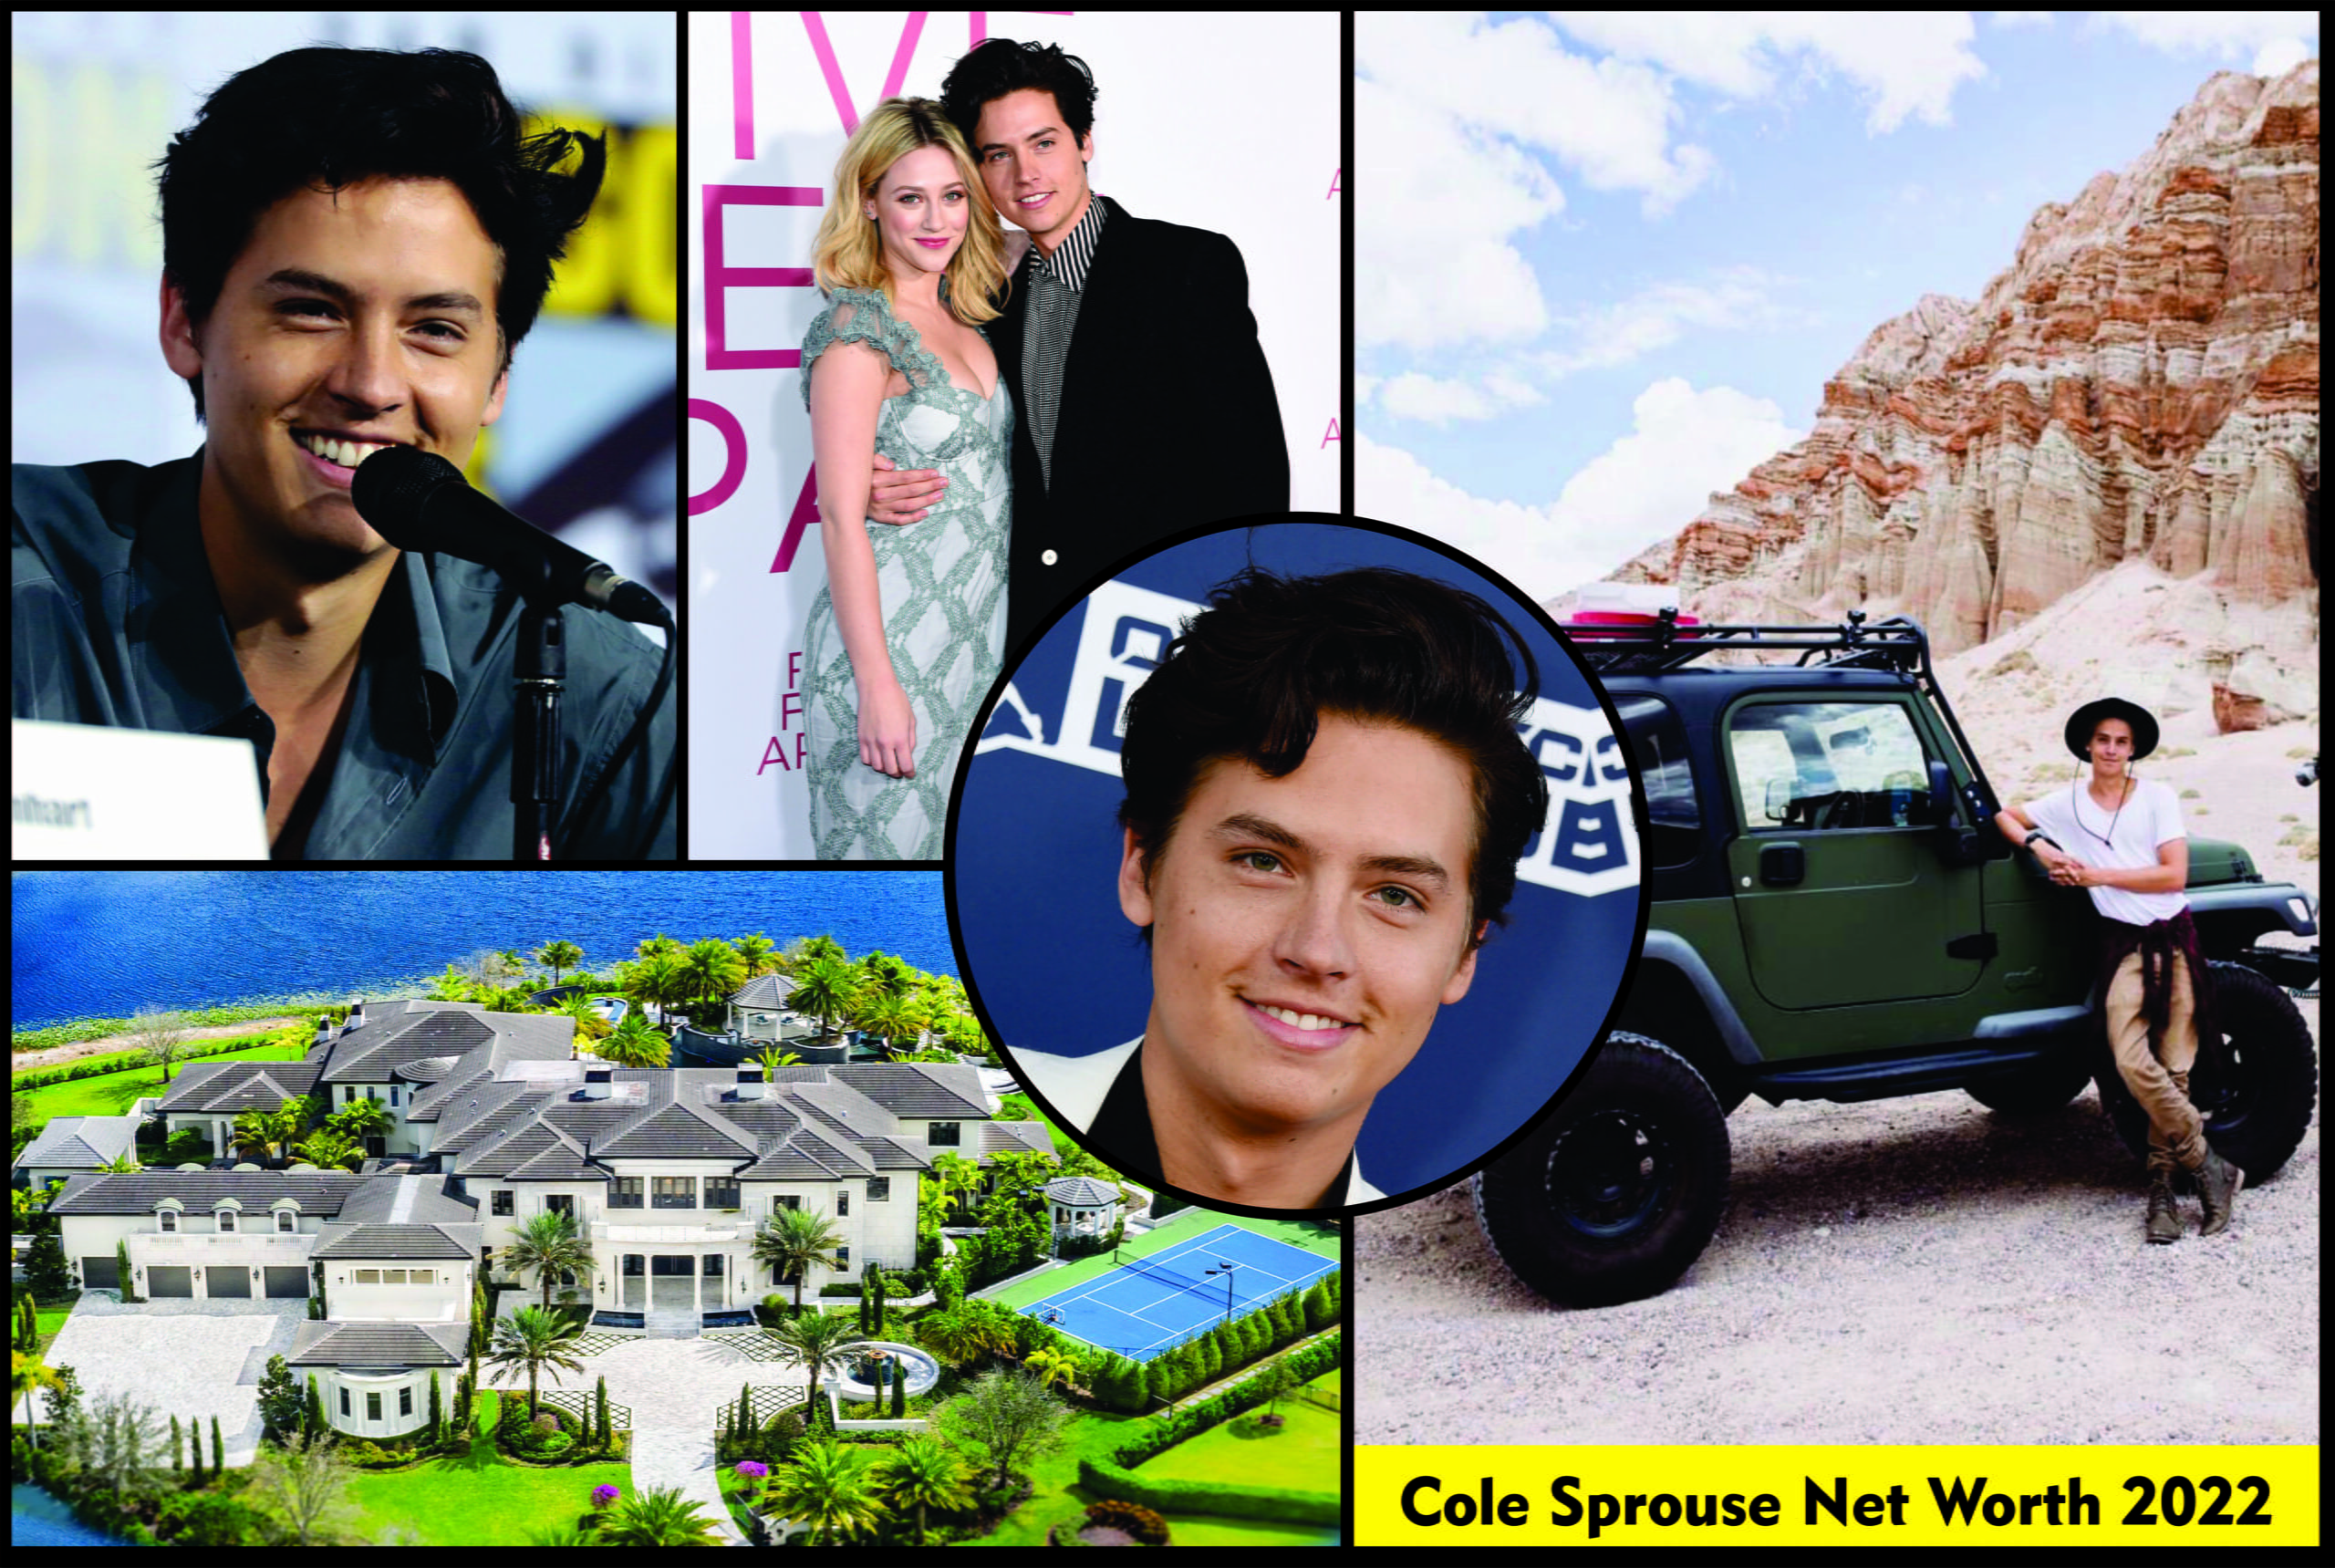 Cole Sprouse Net Worth 2022